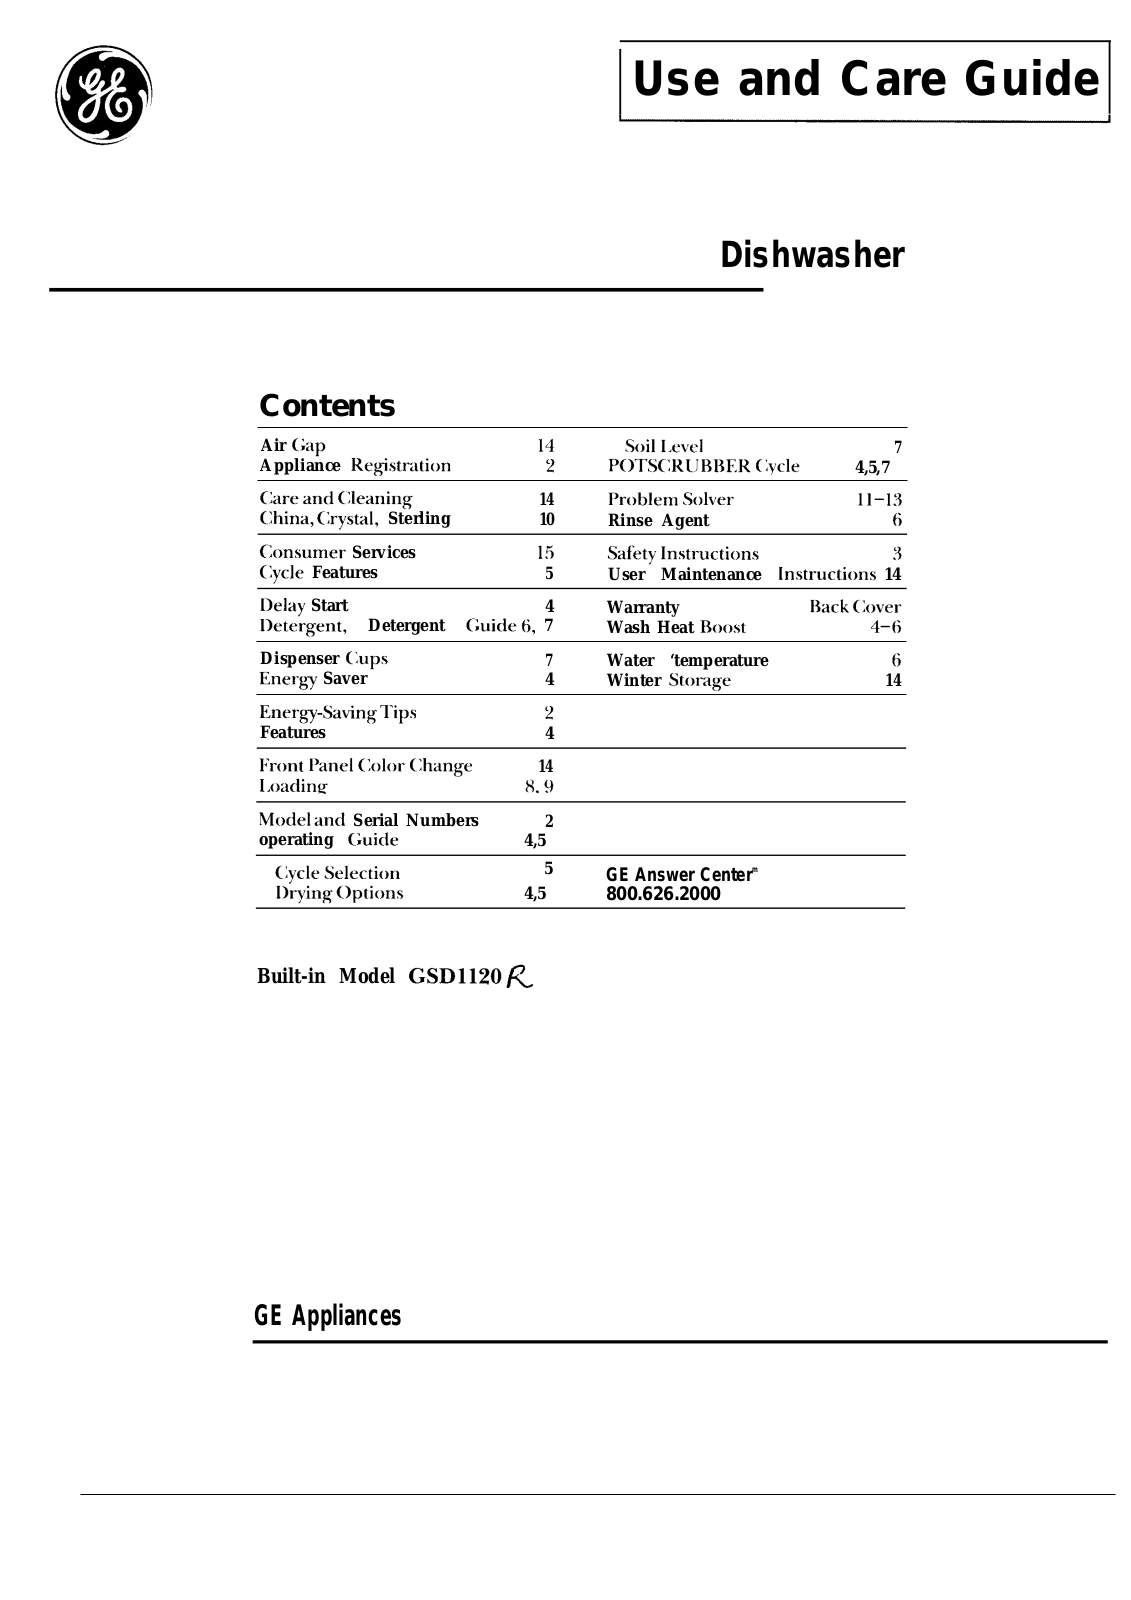 GE GSD1120R Use and Care Manual